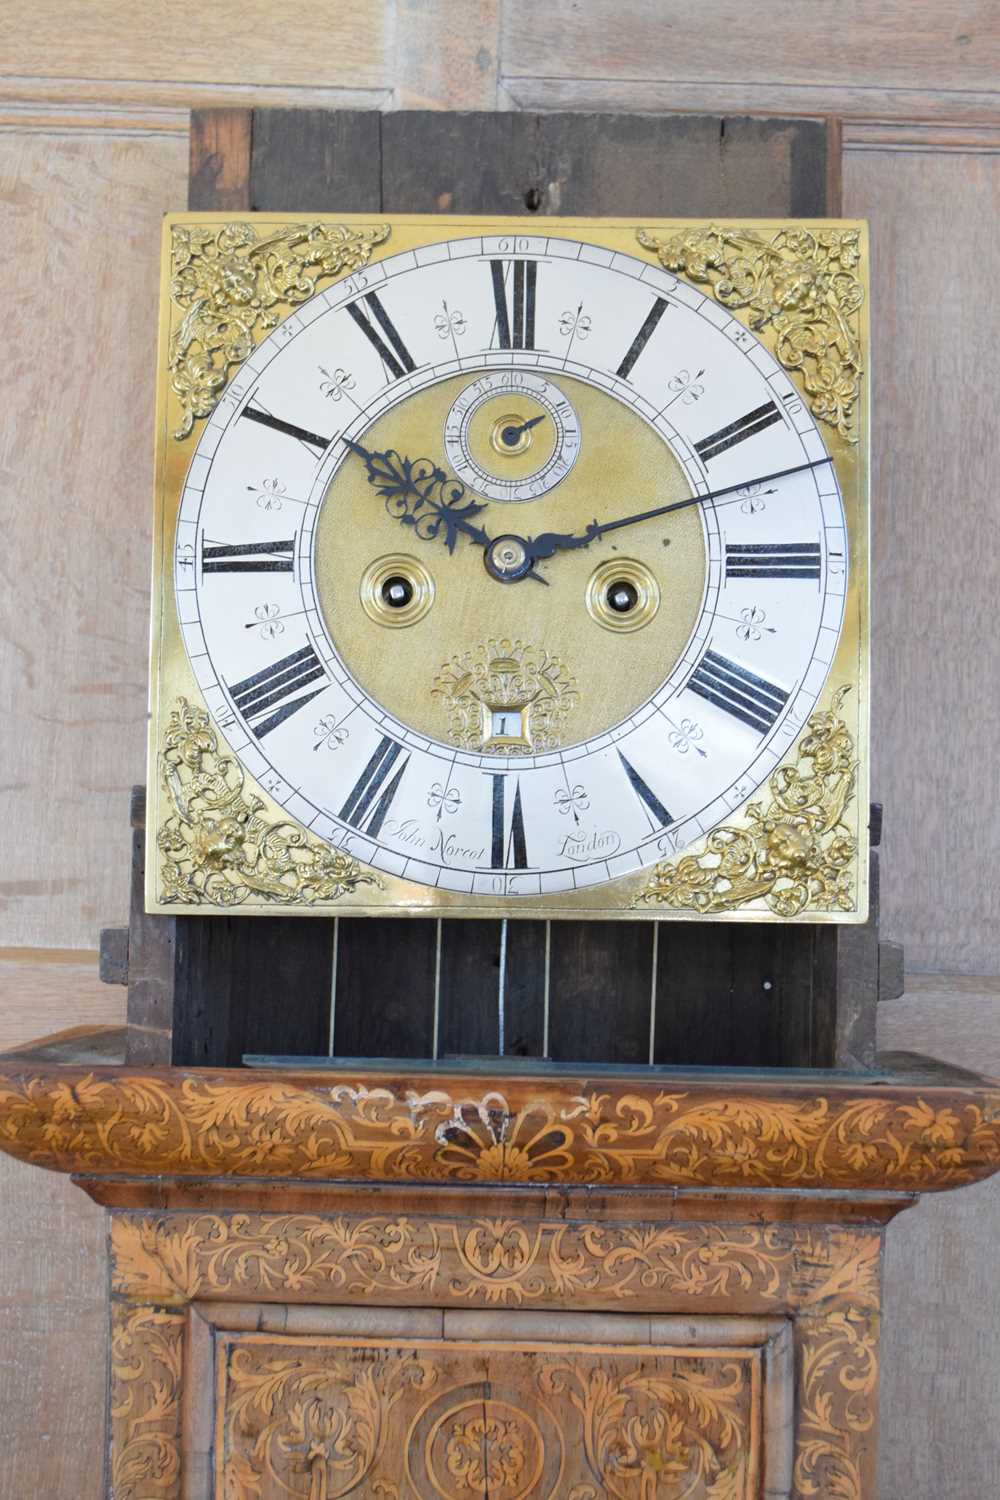 John Norcot, London – Fine walnut and seaweed marquetry eight-day brass dial longcase clock - Image 14 of 18